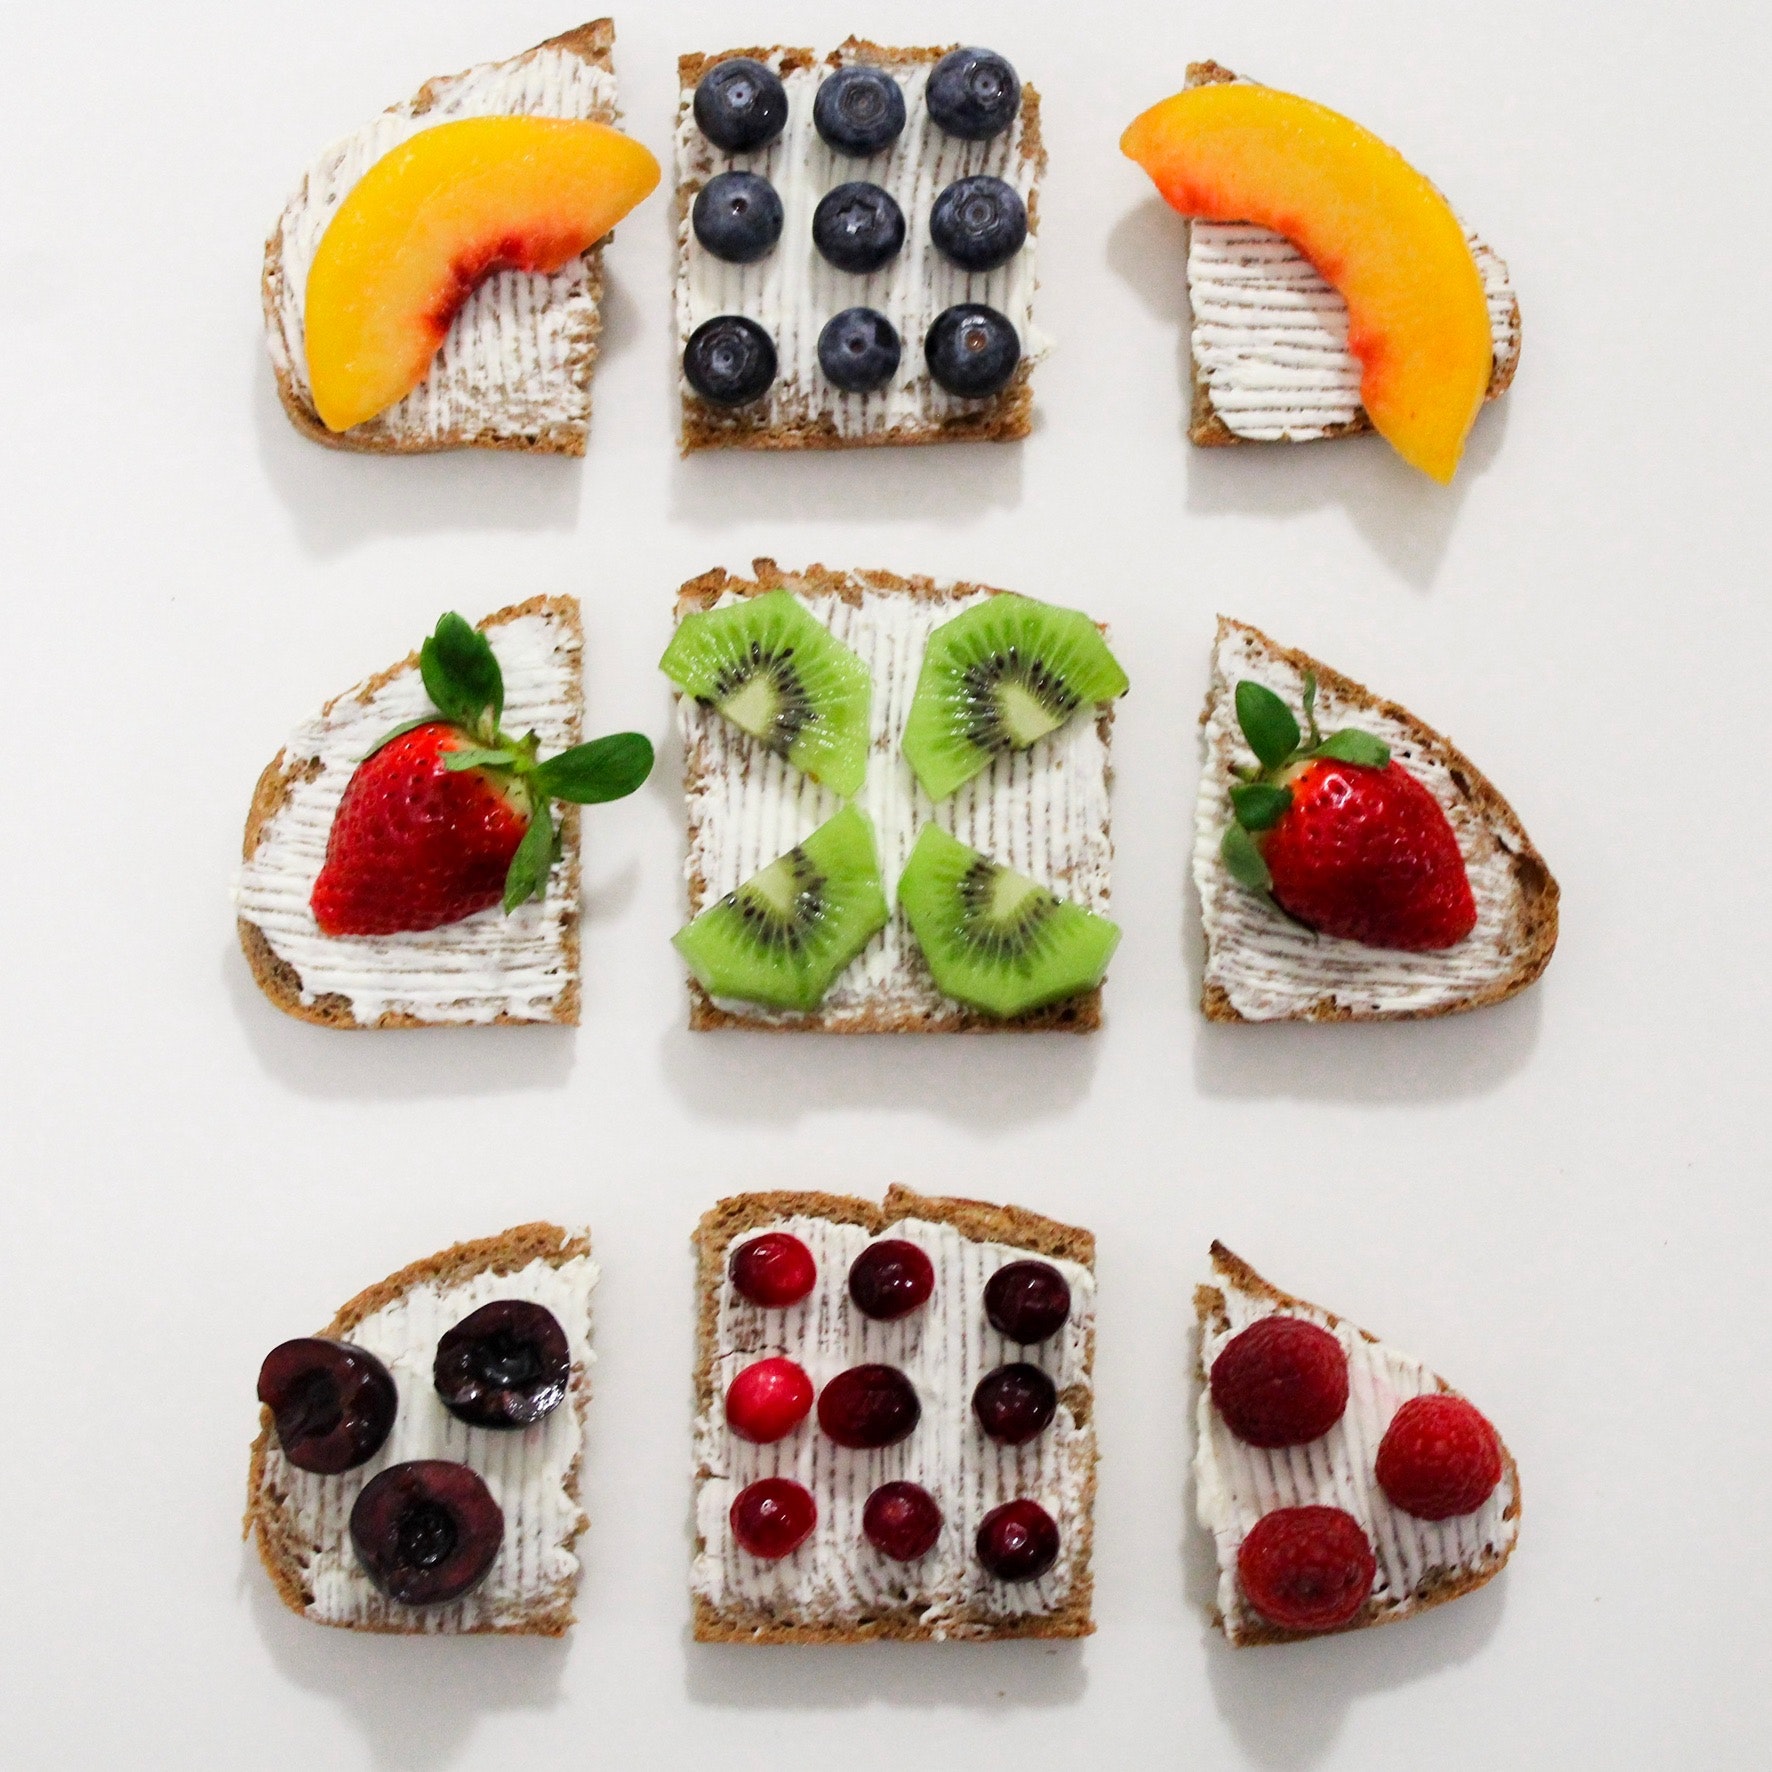 Baked breads with fruit toppings photo